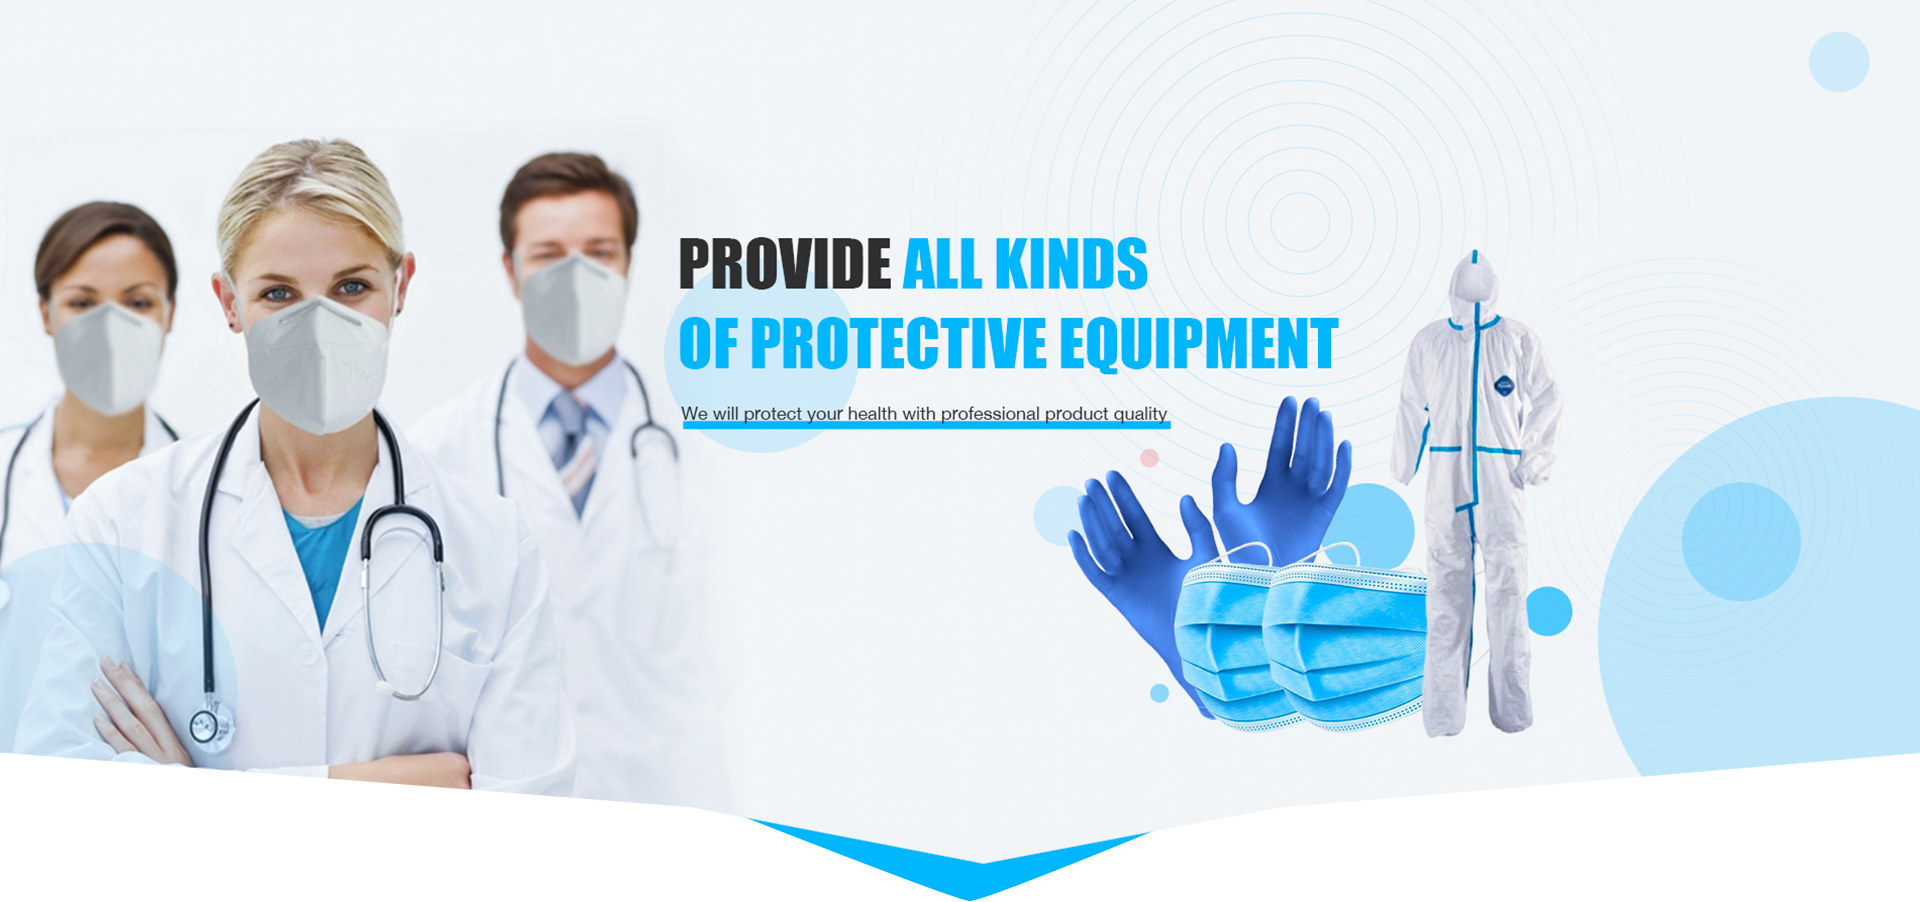 Provide all kinds of protective equipment against Covid-19.